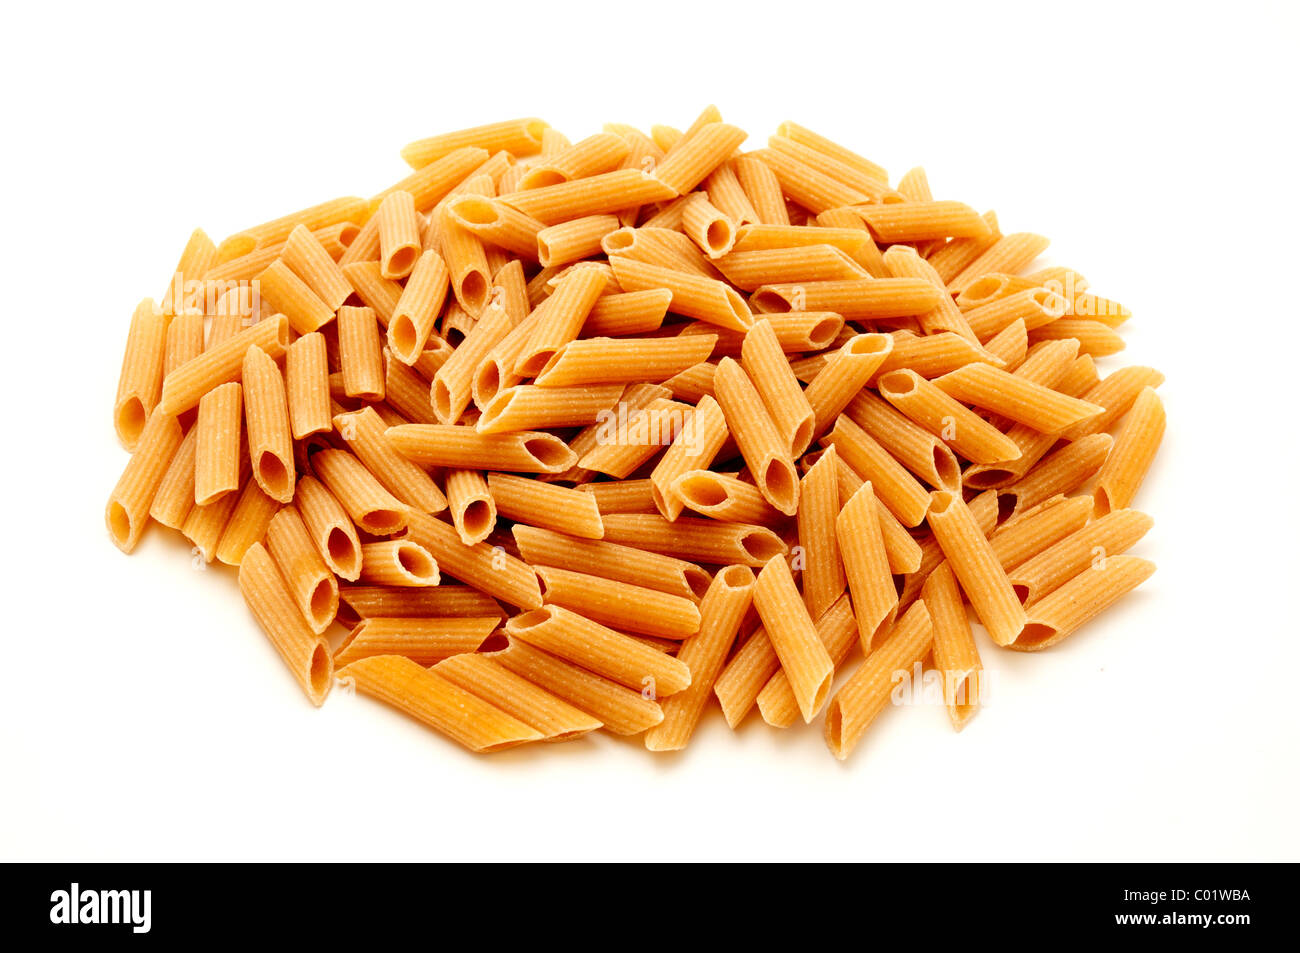 Wholemeal pasta on a white background Stock Photo